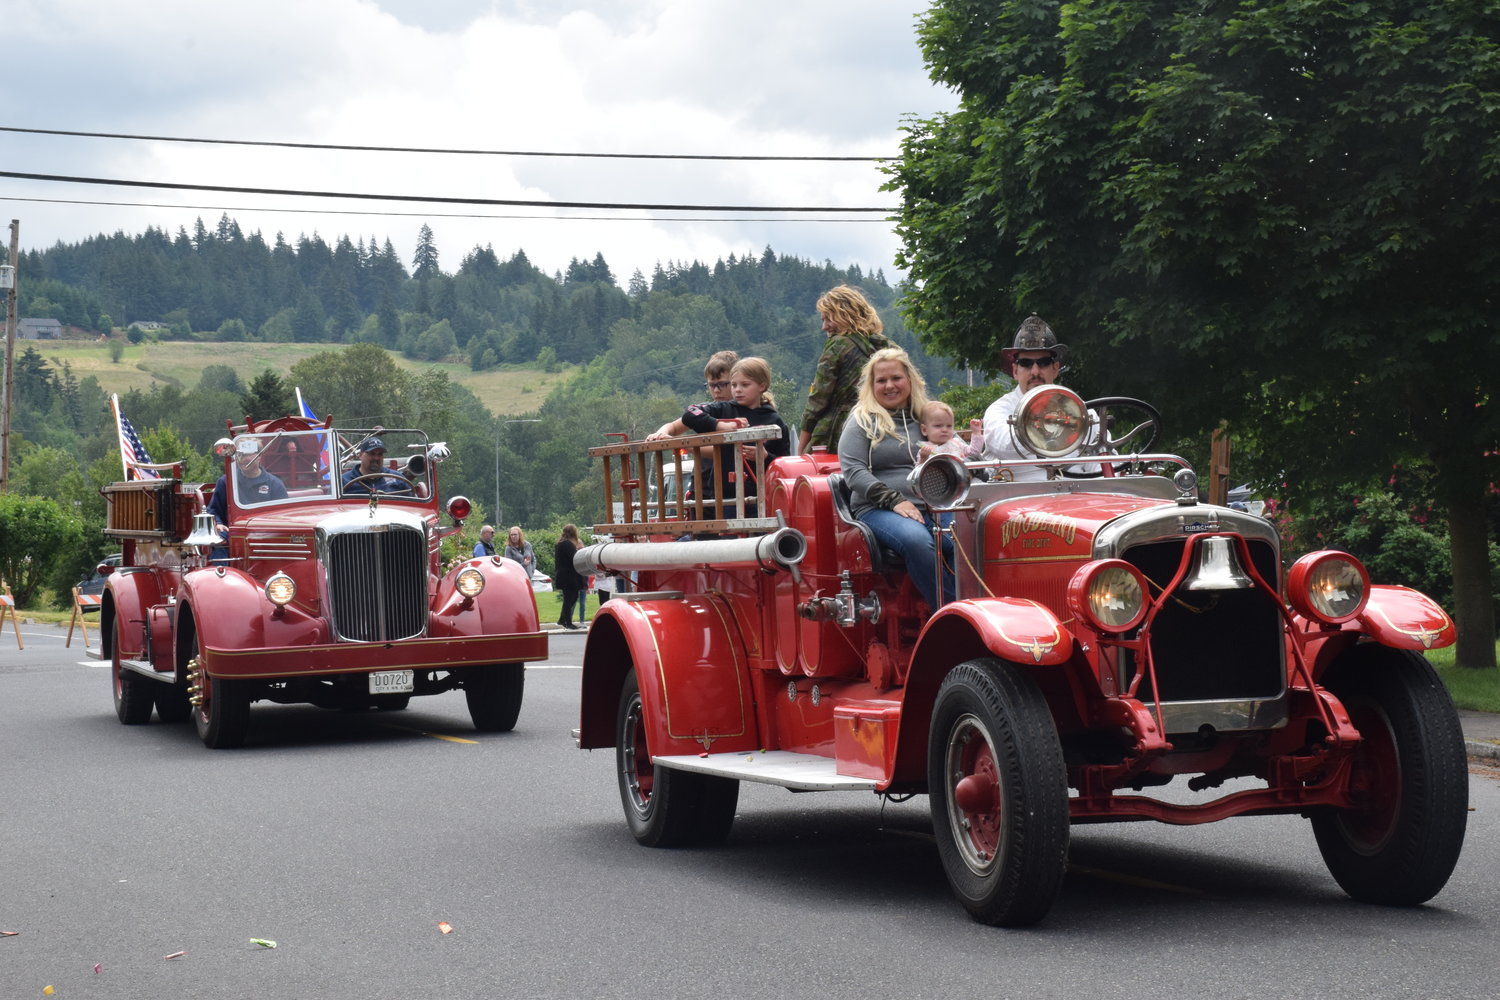 Antique fire engines drive in downtown Woodland during the 100th Planters Days celebration parade on June 18.